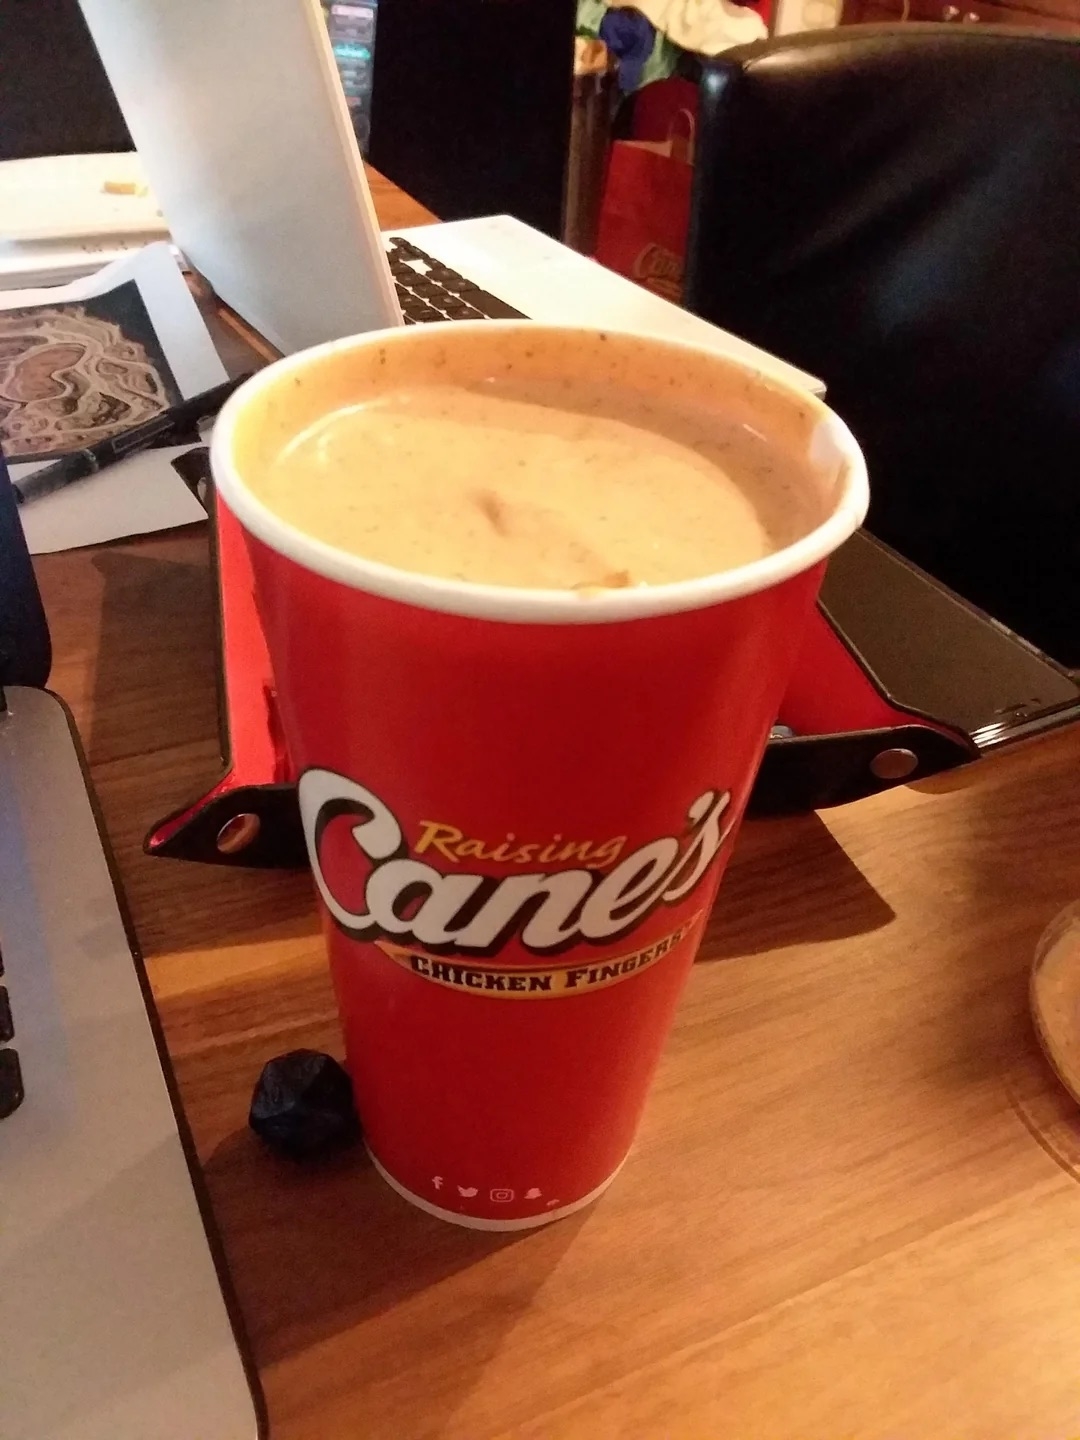 Raising Cane&#x27;s cup filled with sauce on a desk with a laptop in the background